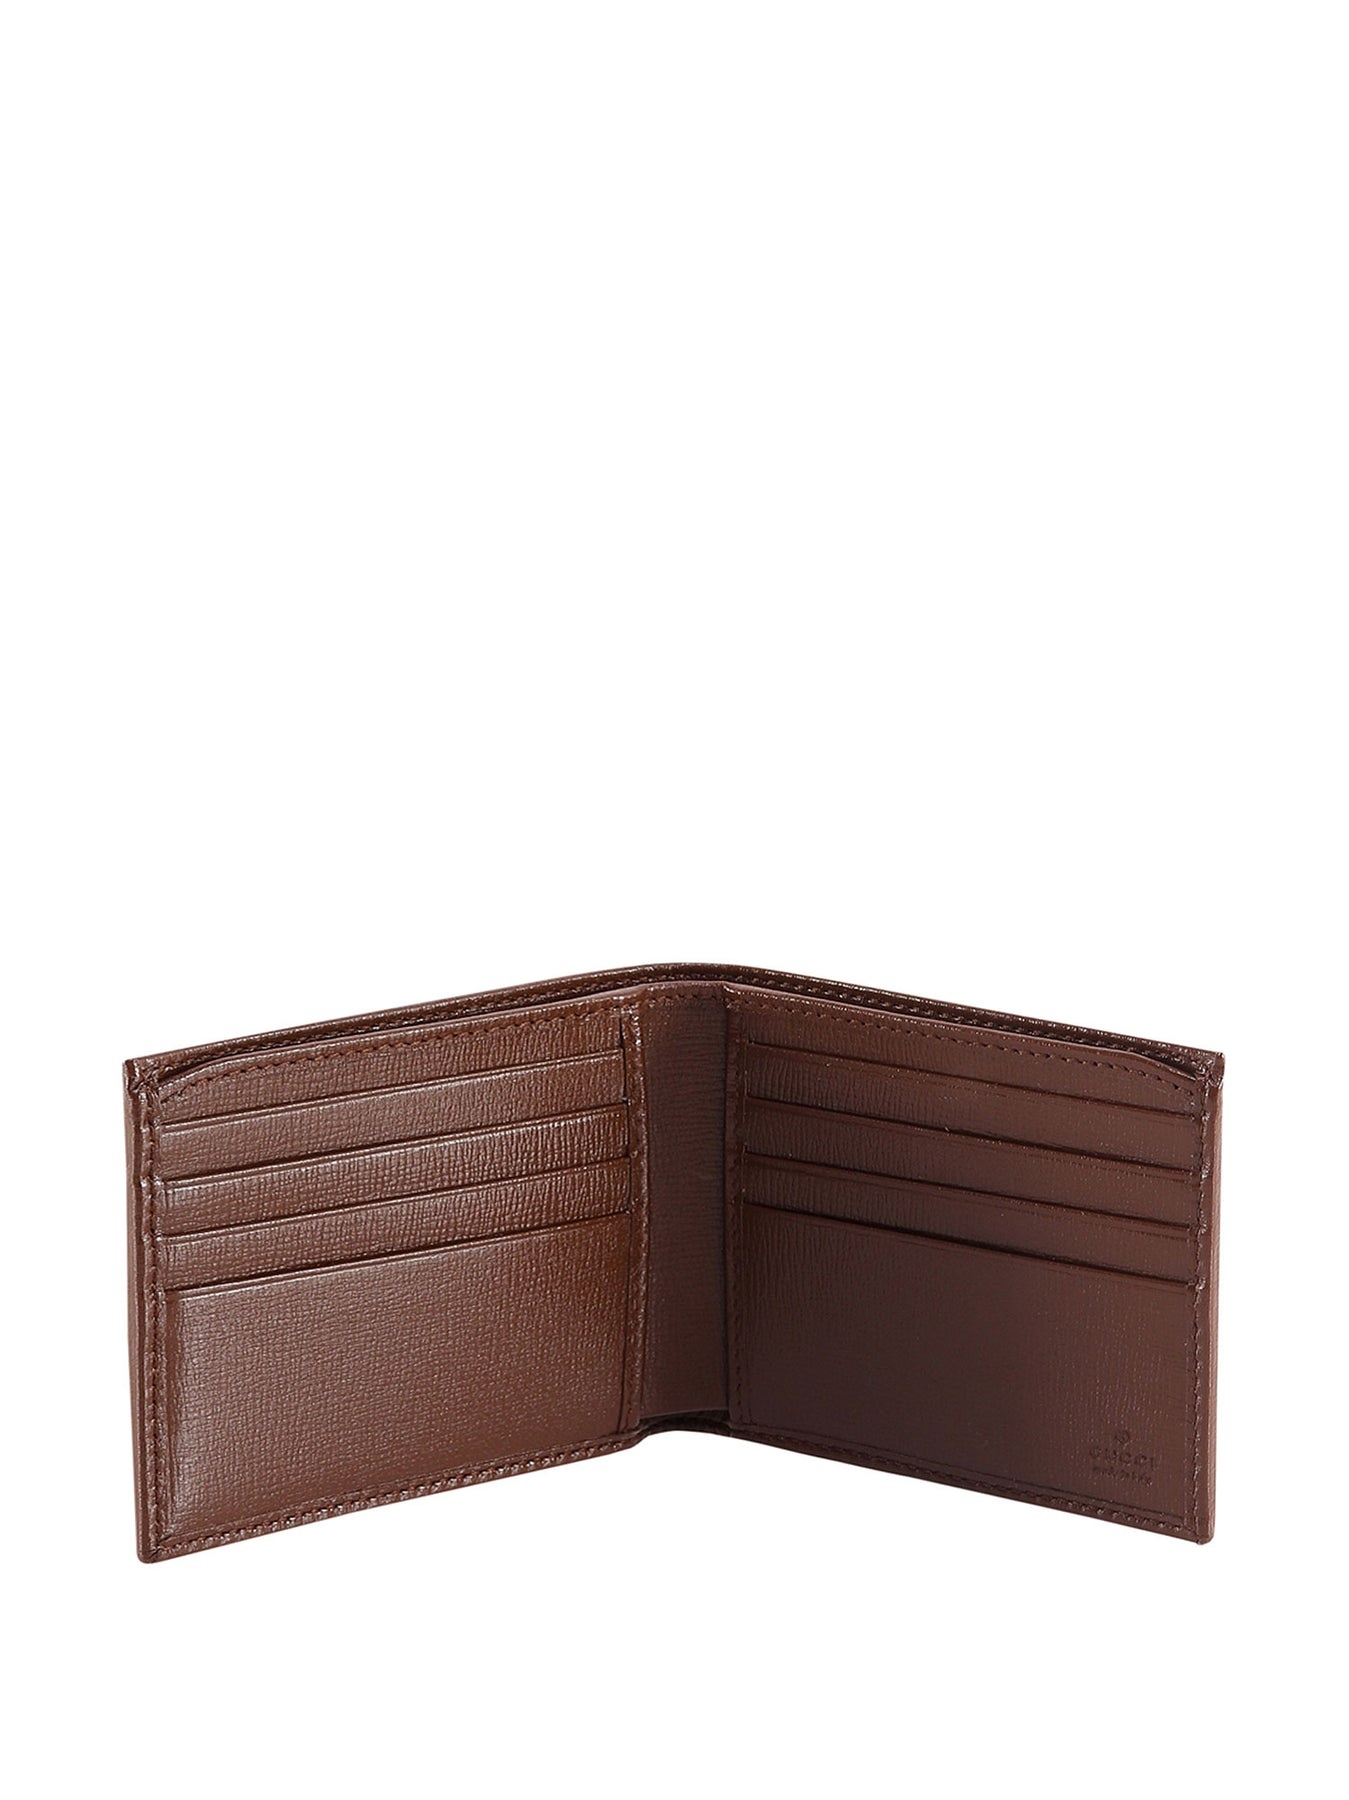 GG wallet with oval leather tag - 3